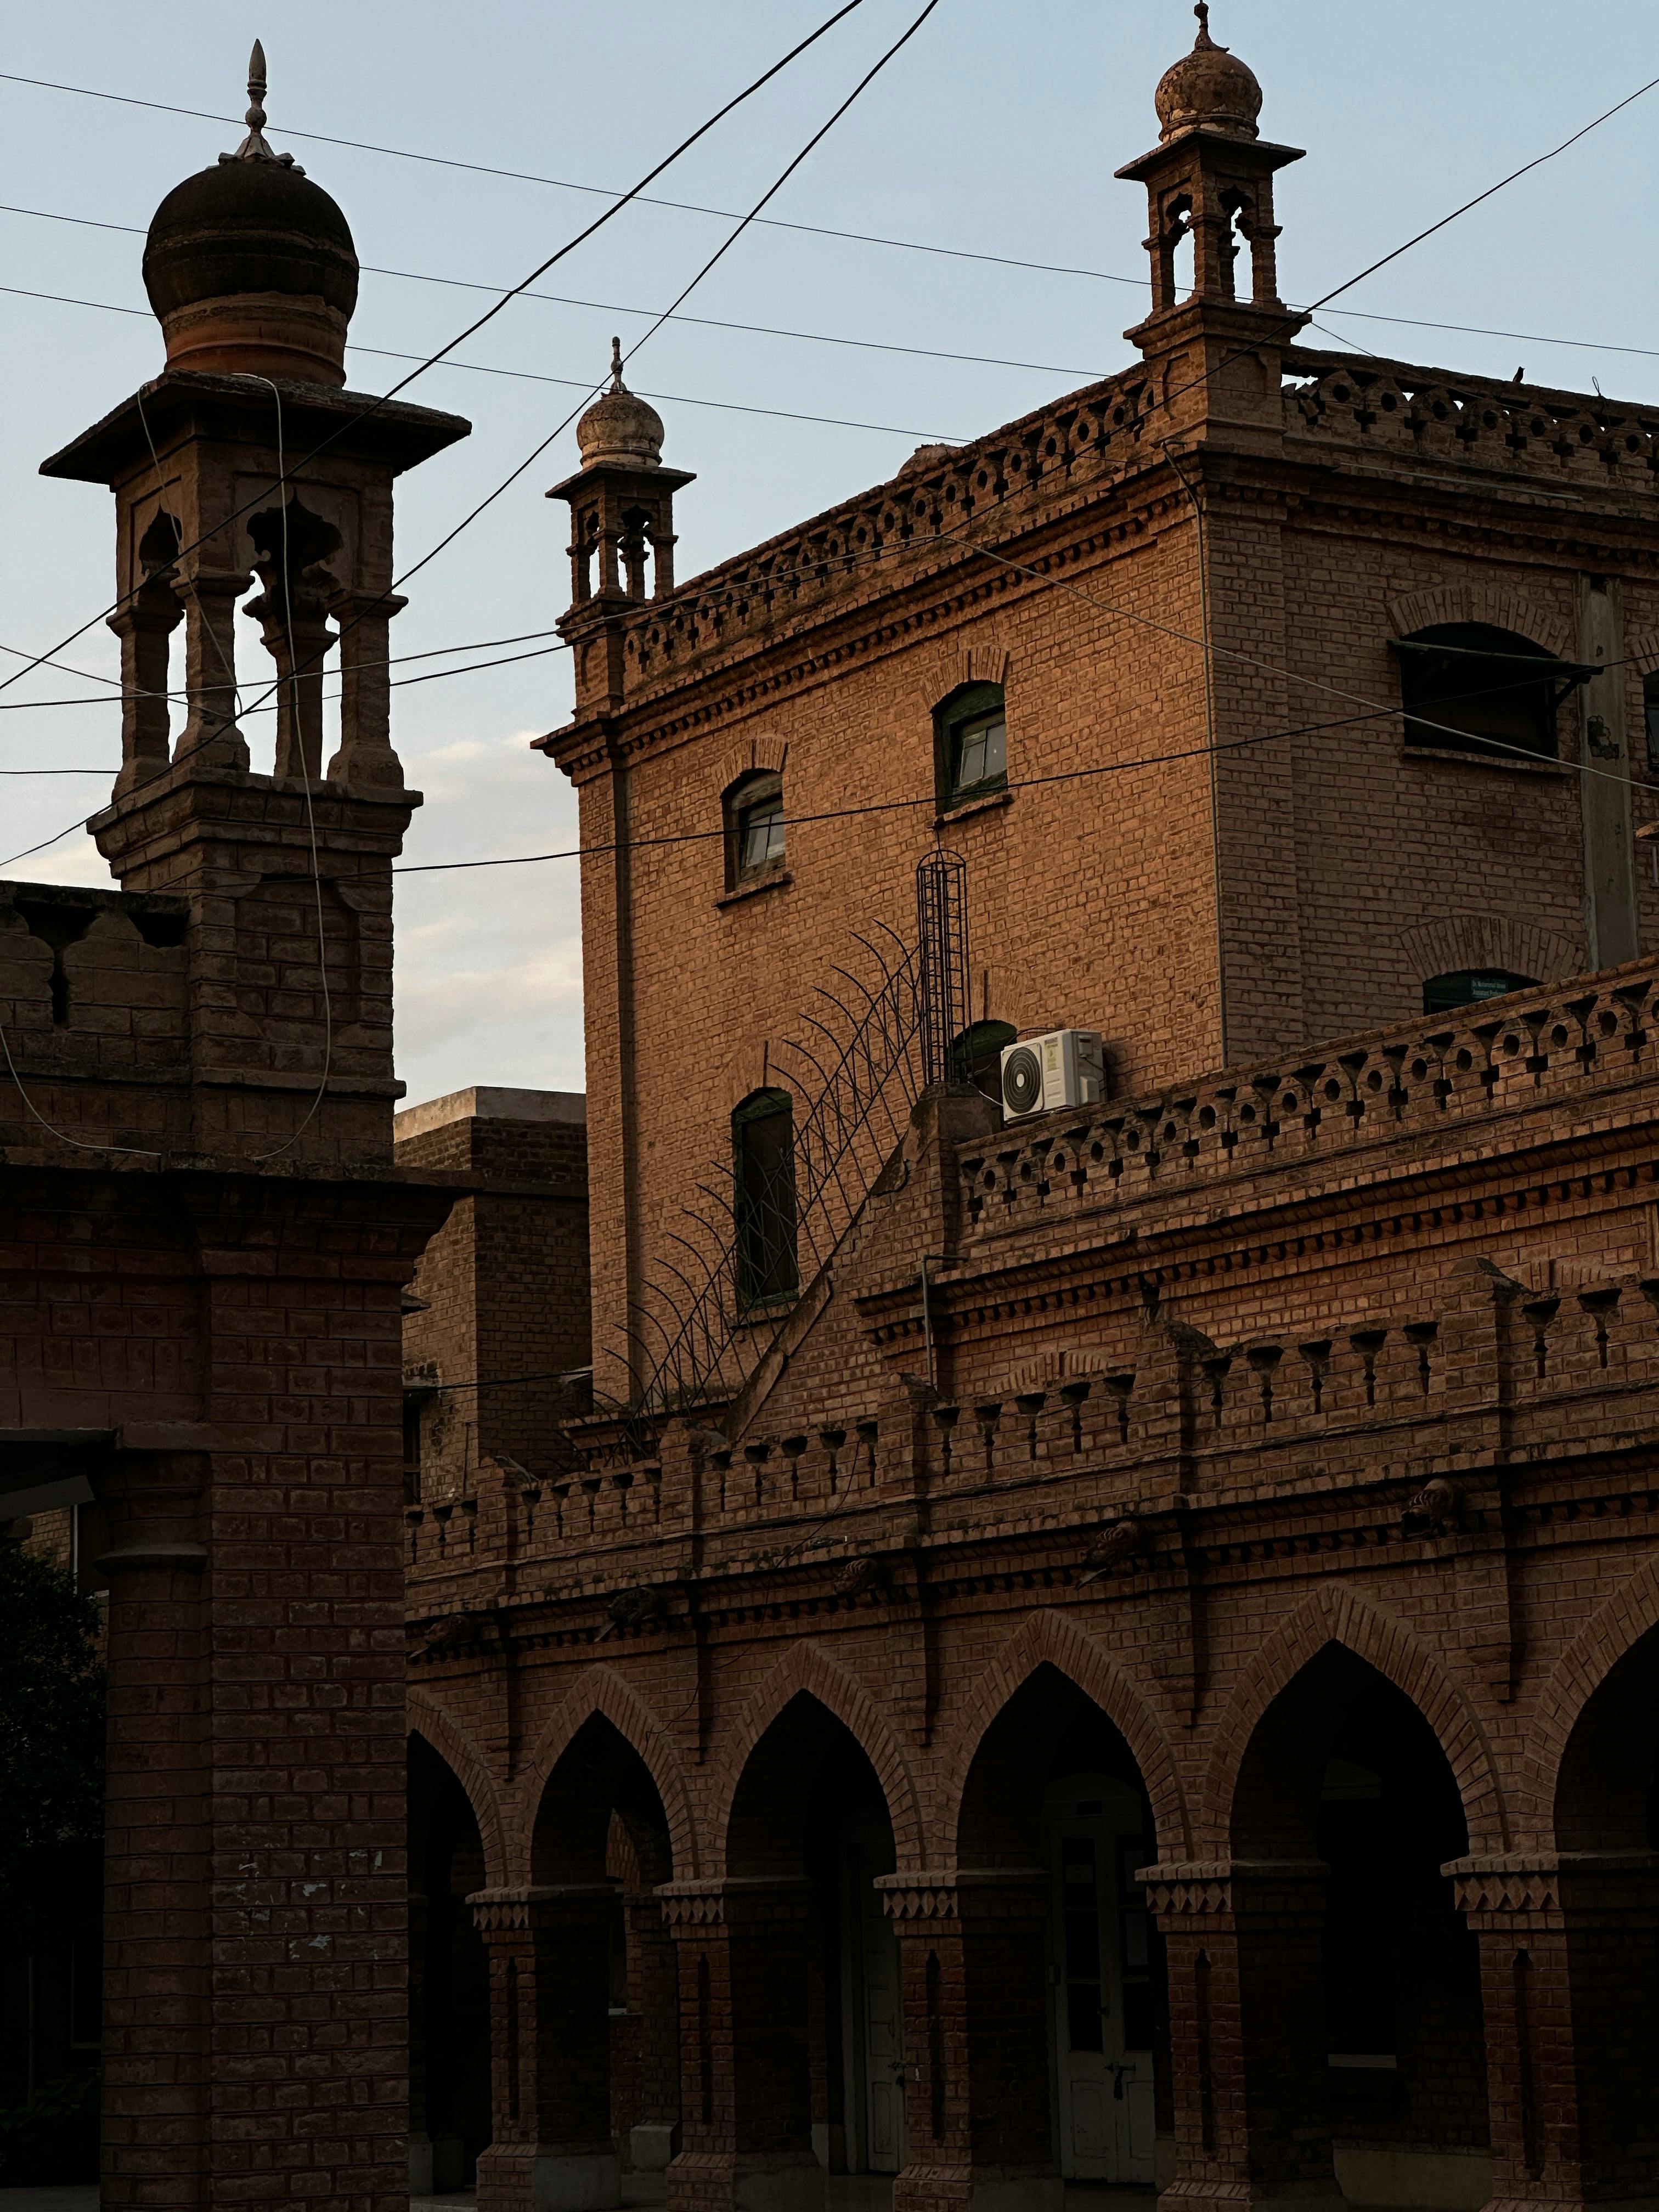 Peshawar  InfopediaPk  All Facts in One Site